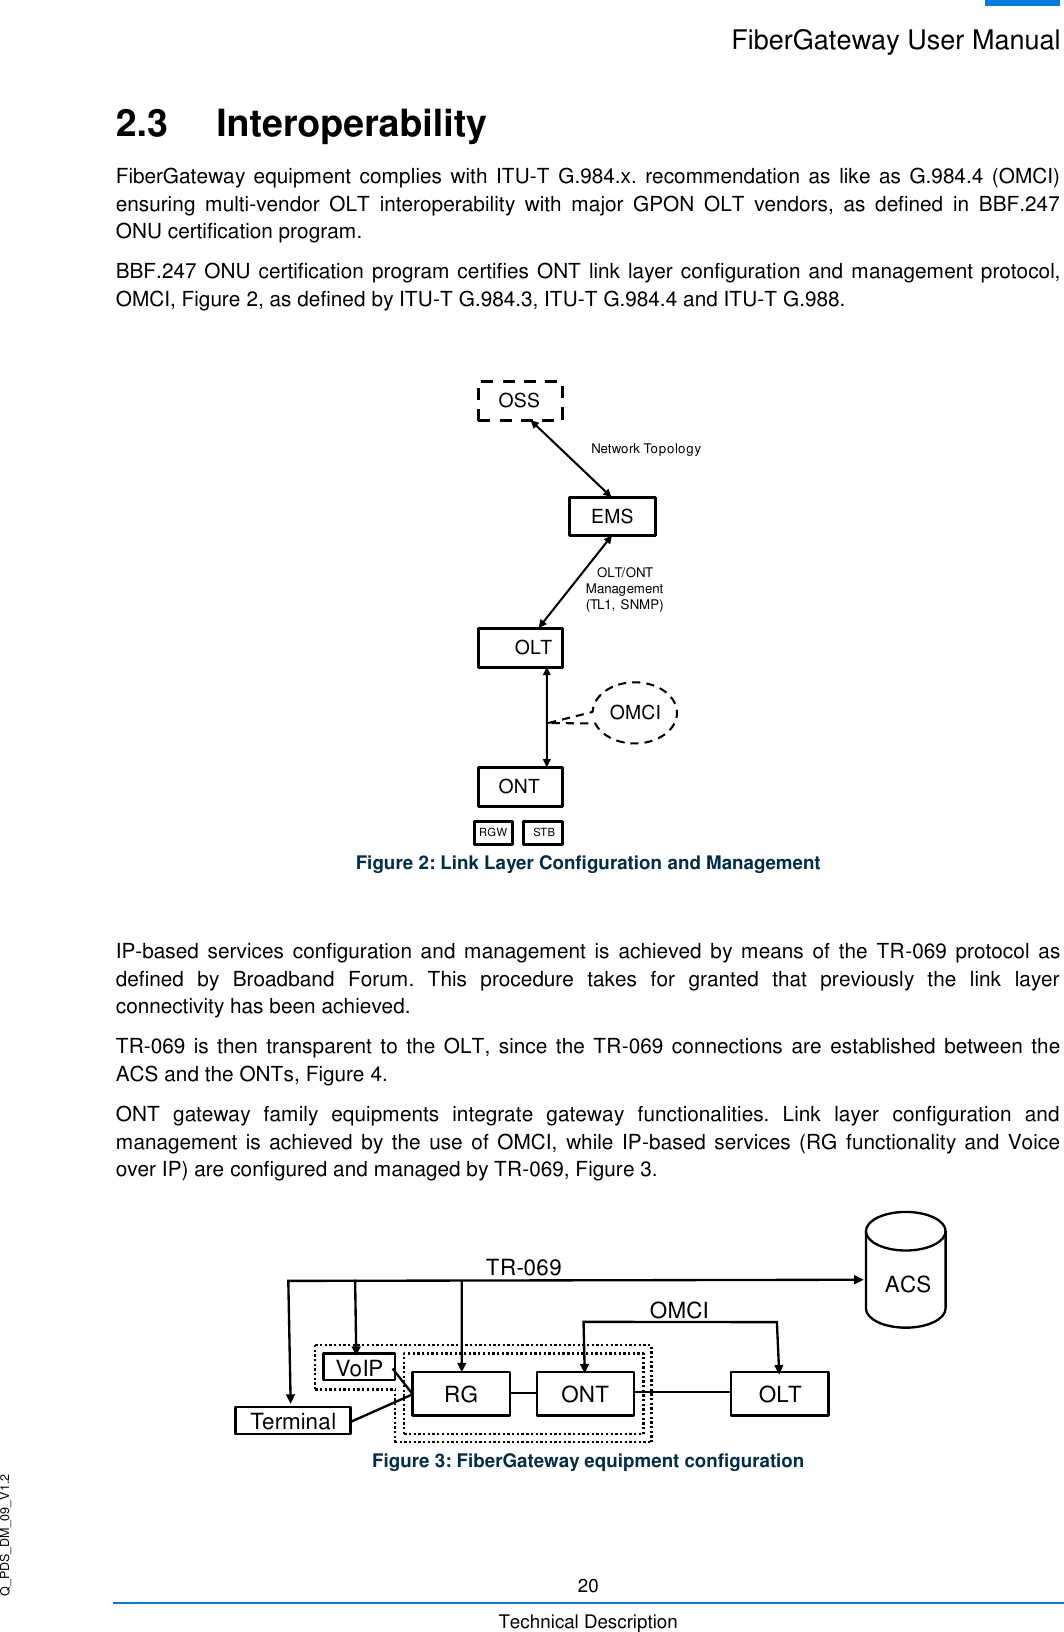 Q_PDS_DM_09_V1.2 FiberGateway User Manual  20 Technical Description 2.3  Interoperability FiberGateway equipment complies with ITU-T G.984.x. recommendation as  like as G.984.4 (OMCI) ensuring  multi-vendor  OLT  interoperability  with  major  GPON  OLT  vendors,  as  defined  in  BBF.247 ONU certification program. BBF.247 ONU certification program certifies ONT link layer configuration and management protocol, OMCI, Figure 2, as defined by ITU-T G.984.3, ITU-T G.984.4 and ITU-T G.988.   Figure 2: Link Layer Configuration and Management  IP-based services configuration and management  is achieved  by means of the TR-069  protocol as defined  by  Broadband  Forum.  This  procedure  takes  for  granted  that  previously  the  link  layer connectivity has been achieved. TR-069 is  then transparent to the OLT, since the TR-069 connections  are established  between the ACS and the ONTs, Figure 4. ONT  gateway  family  equipments  integrate  gateway  functionalities.  Link  layer  configuration  and management is achieved by the use of OMCI,  while IP-based services (RG functionality and Voice over IP) are configured and managed by TR-069, Figure 3.  Figure 3: FiberGateway equipment configuration  OSSEMSOLTONTRGW STBOMCINetwork TopologyOLT/ONTManagement(TL1, SNMP)ONTRG OLTACSVoIPTerminalTR-069OMCI